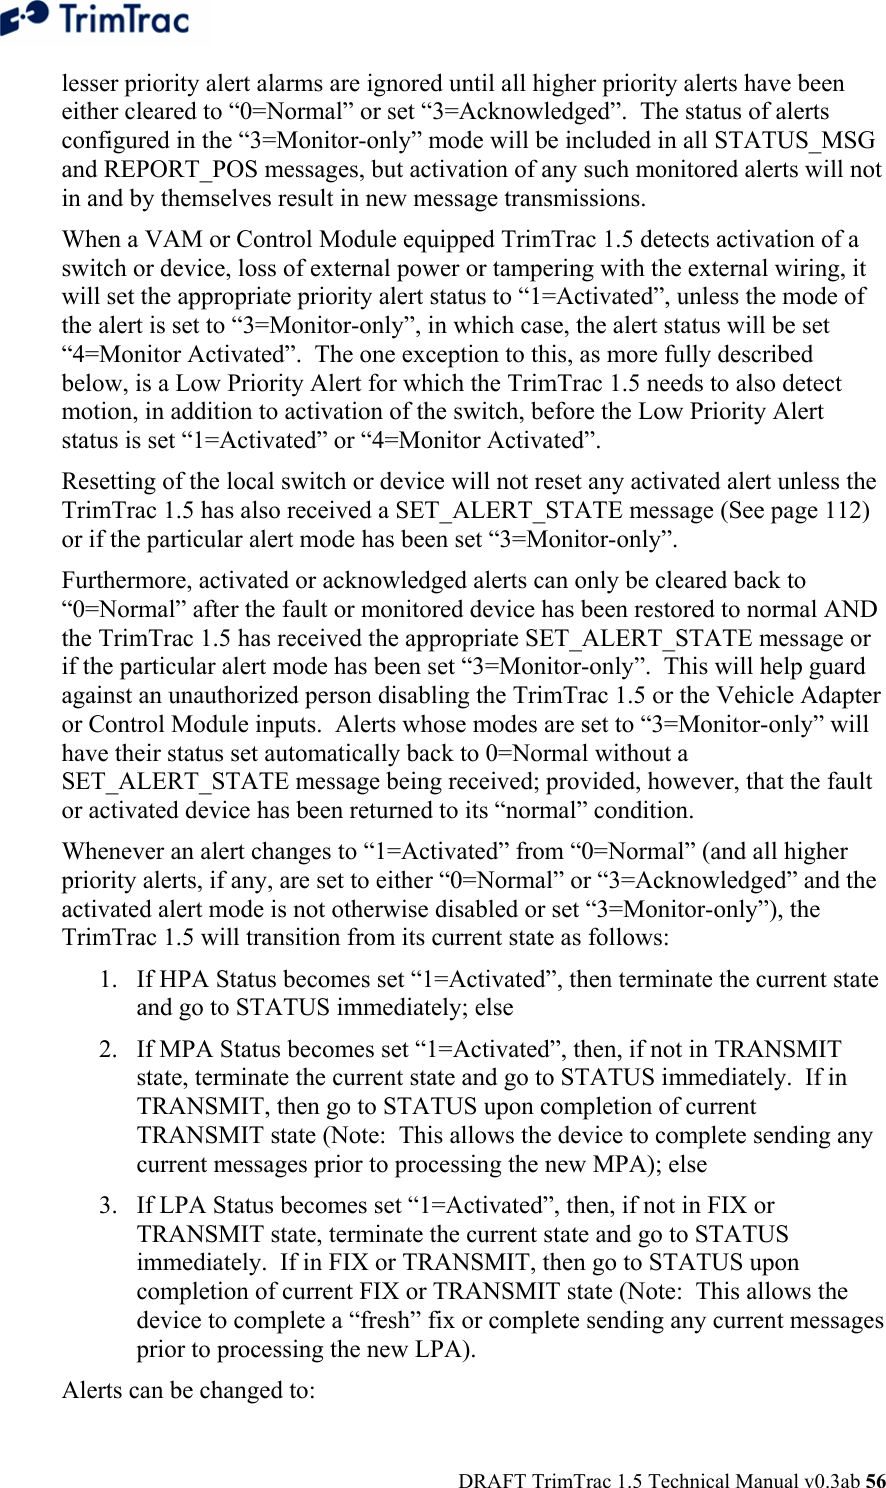  DRAFT TrimTrac 1.5 Technical Manual v0.3ab 56 lesser priority alert alarms are ignored until all higher priority alerts have been either cleared to “0=Normal” or set “3=Acknowledged”.  The status of alerts configured in the “3=Monitor-only” mode will be included in all STATUS_MSG and REPORT_POS messages, but activation of any such monitored alerts will not in and by themselves result in new message transmissions. When a VAM or Control Module equipped TrimTrac 1.5 detects activation of a switch or device, loss of external power or tampering with the external wiring, it will set the appropriate priority alert status to “1=Activated”, unless the mode of the alert is set to “3=Monitor-only”, in which case, the alert status will be set “4=Monitor Activated”.  The one exception to this, as more fully described below, is a Low Priority Alert for which the TrimTrac 1.5 needs to also detect motion, in addition to activation of the switch, before the Low Priority Alert status is set “1=Activated” or “4=Monitor Activated”. Resetting of the local switch or device will not reset any activated alert unless the TrimTrac 1.5 has also received a SET_ALERT_STATE message (See page 112) or if the particular alert mode has been set “3=Monitor-only”.   Furthermore, activated or acknowledged alerts can only be cleared back to “0=Normal” after the fault or monitored device has been restored to normal AND the TrimTrac 1.5 has received the appropriate SET_ALERT_STATE message or if the particular alert mode has been set “3=Monitor-only”.  This will help guard against an unauthorized person disabling the TrimTrac 1.5 or the Vehicle Adapter or Control Module inputs.  Alerts whose modes are set to “3=Monitor-only” will have their status set automatically back to 0=Normal without a SET_ALERT_STATE message being received; provided, however, that the fault or activated device has been returned to its “normal” condition. Whenever an alert changes to “1=Activated” from “0=Normal” (and all higher priority alerts, if any, are set to either “0=Normal” or “3=Acknowledged” and the activated alert mode is not otherwise disabled or set “3=Monitor-only”), the TrimTrac 1.5 will transition from its current state as follows: 1. If HPA Status becomes set “1=Activated”, then terminate the current state and go to STATUS immediately; else 2. If MPA Status becomes set “1=Activated”, then, if not in TRANSMIT state, terminate the current state and go to STATUS immediately.  If in TRANSMIT, then go to STATUS upon completion of current TRANSMIT state (Note:  This allows the device to complete sending any current messages prior to processing the new MPA); else 3. If LPA Status becomes set “1=Activated”, then, if not in FIX or TRANSMIT state, terminate the current state and go to STATUS immediately.  If in FIX or TRANSMIT, then go to STATUS upon completion of current FIX or TRANSMIT state (Note:  This allows the device to complete a “fresh” fix or complete sending any current messages prior to processing the new LPA). Alerts can be changed to:  